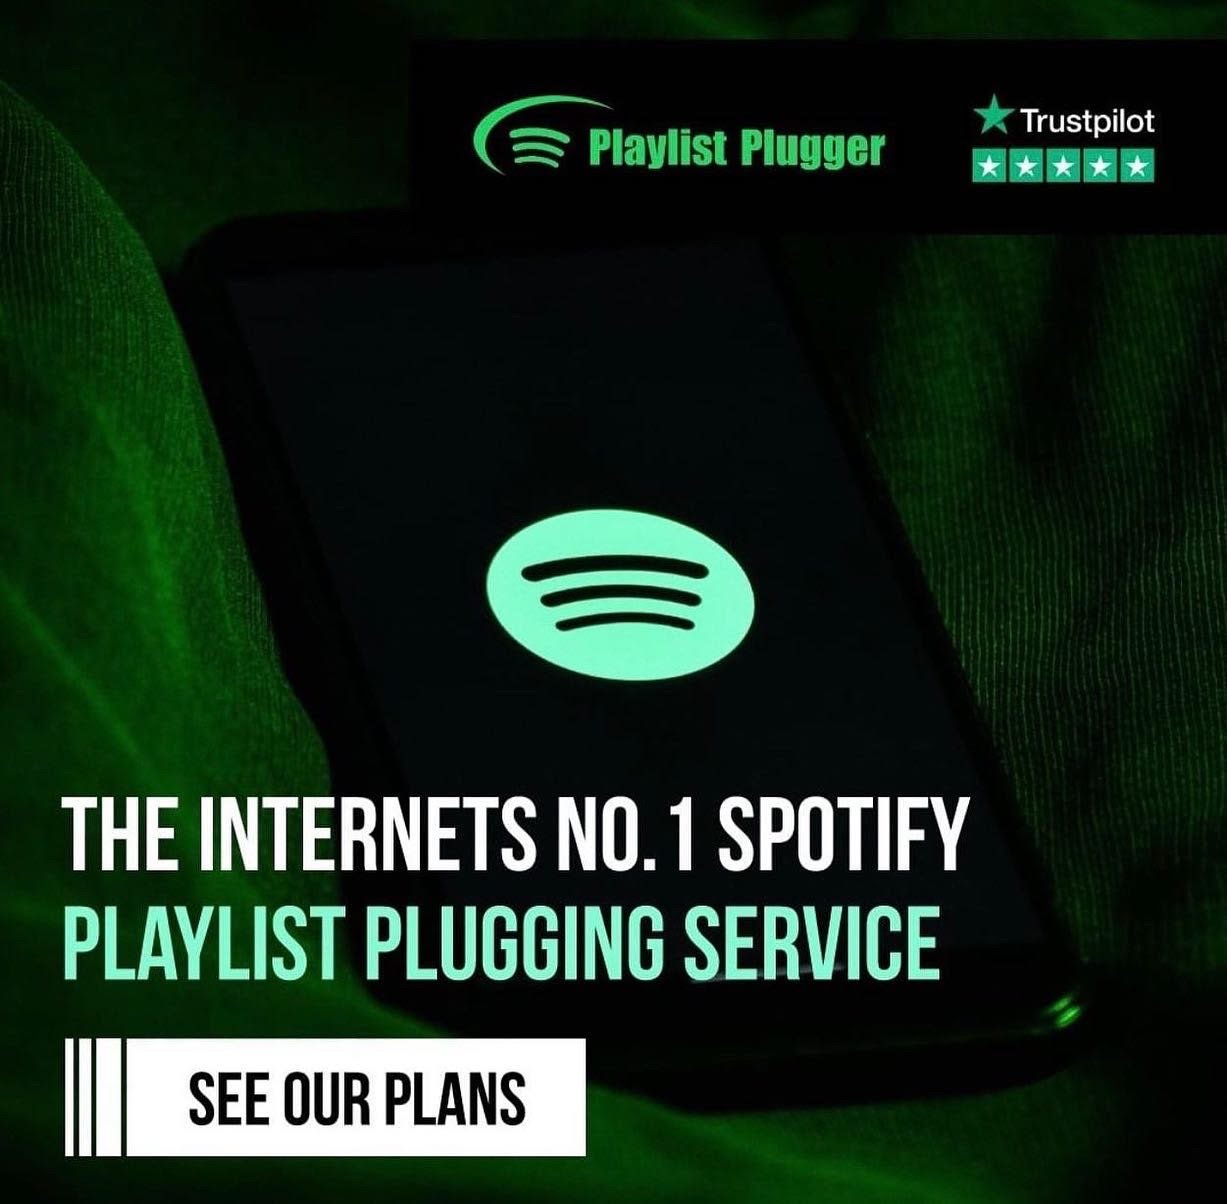 Get Your Songs Featured On Spotify Playlists With This Music Promotion Service